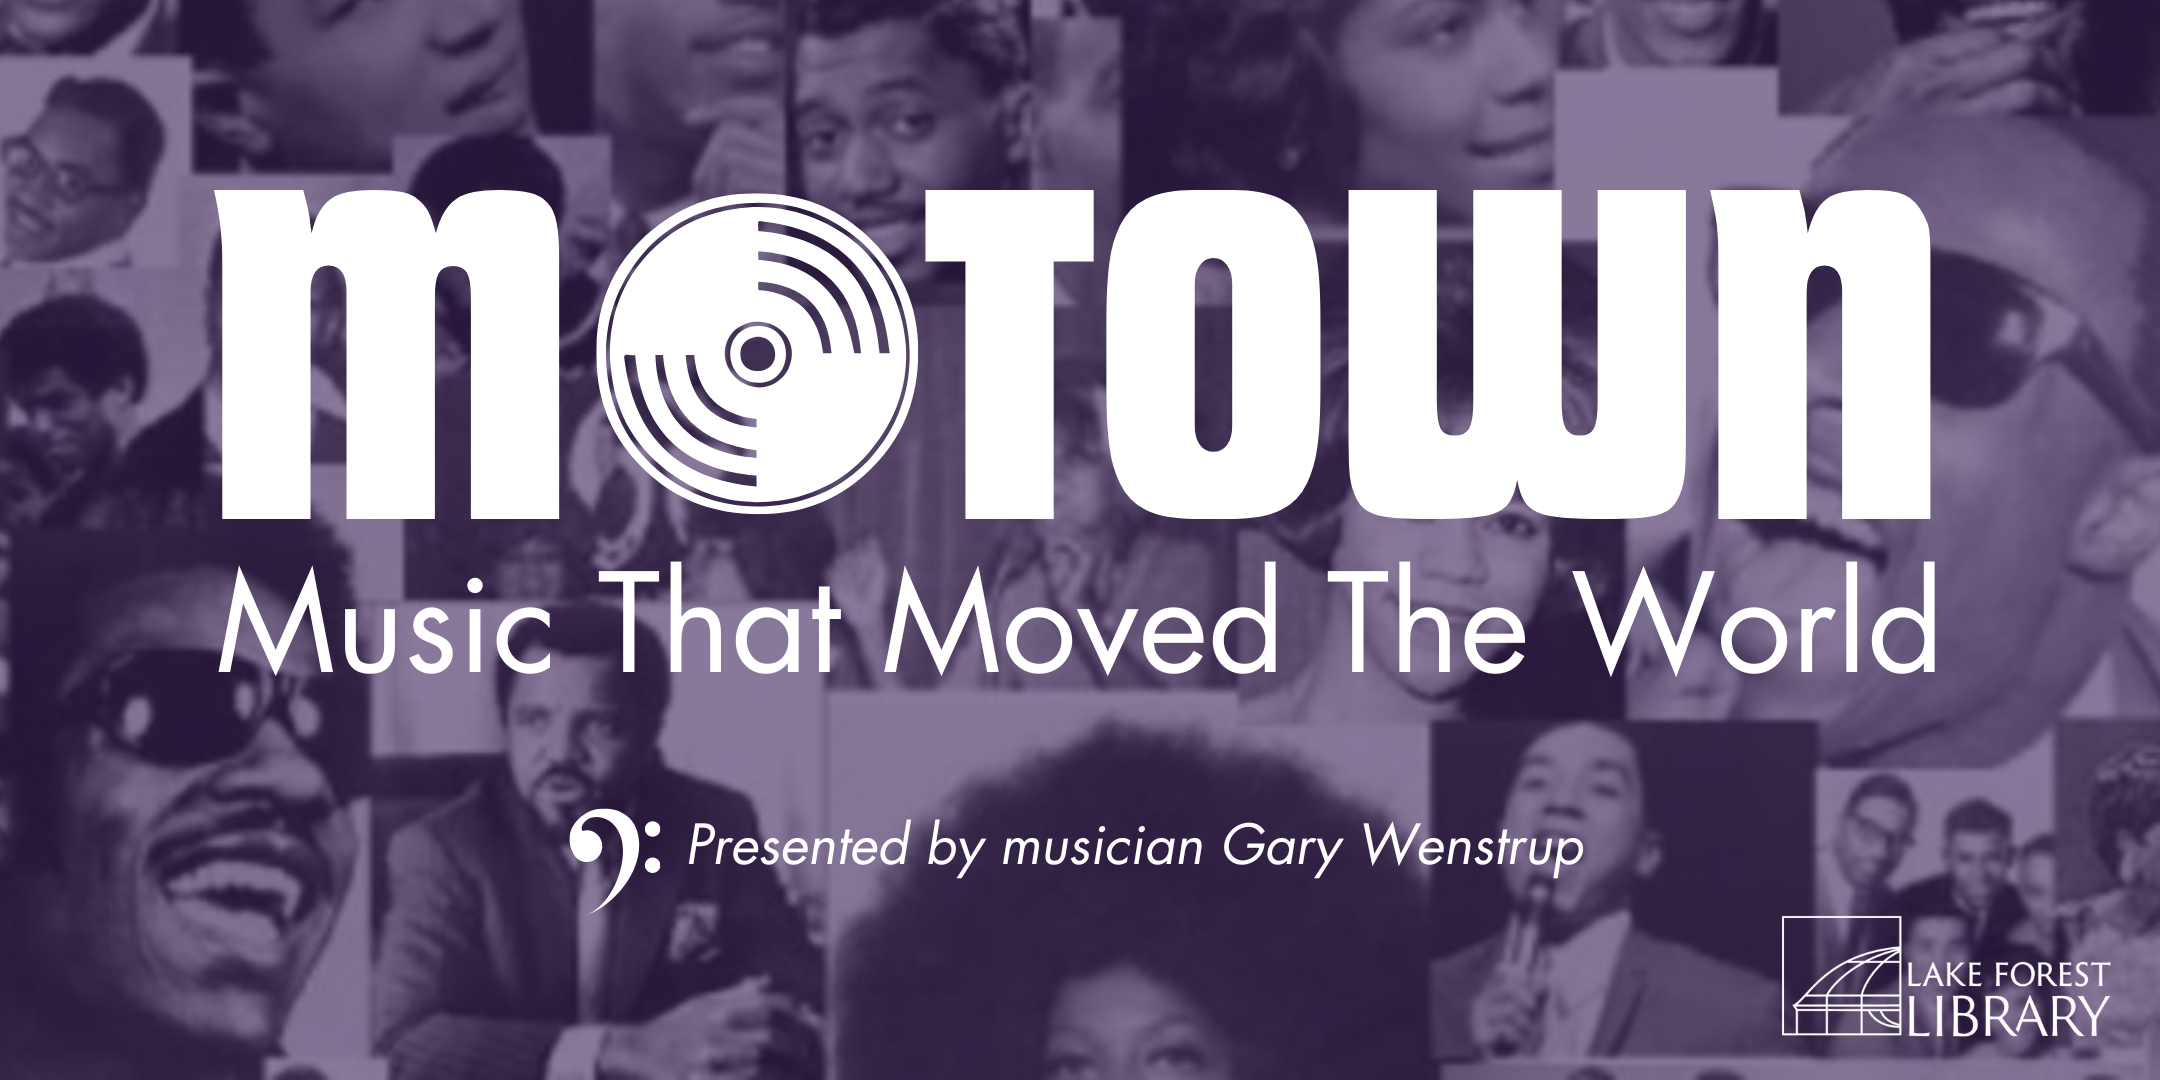 image of "Motown: Music that moved the world with musician Gary Wenstrup"